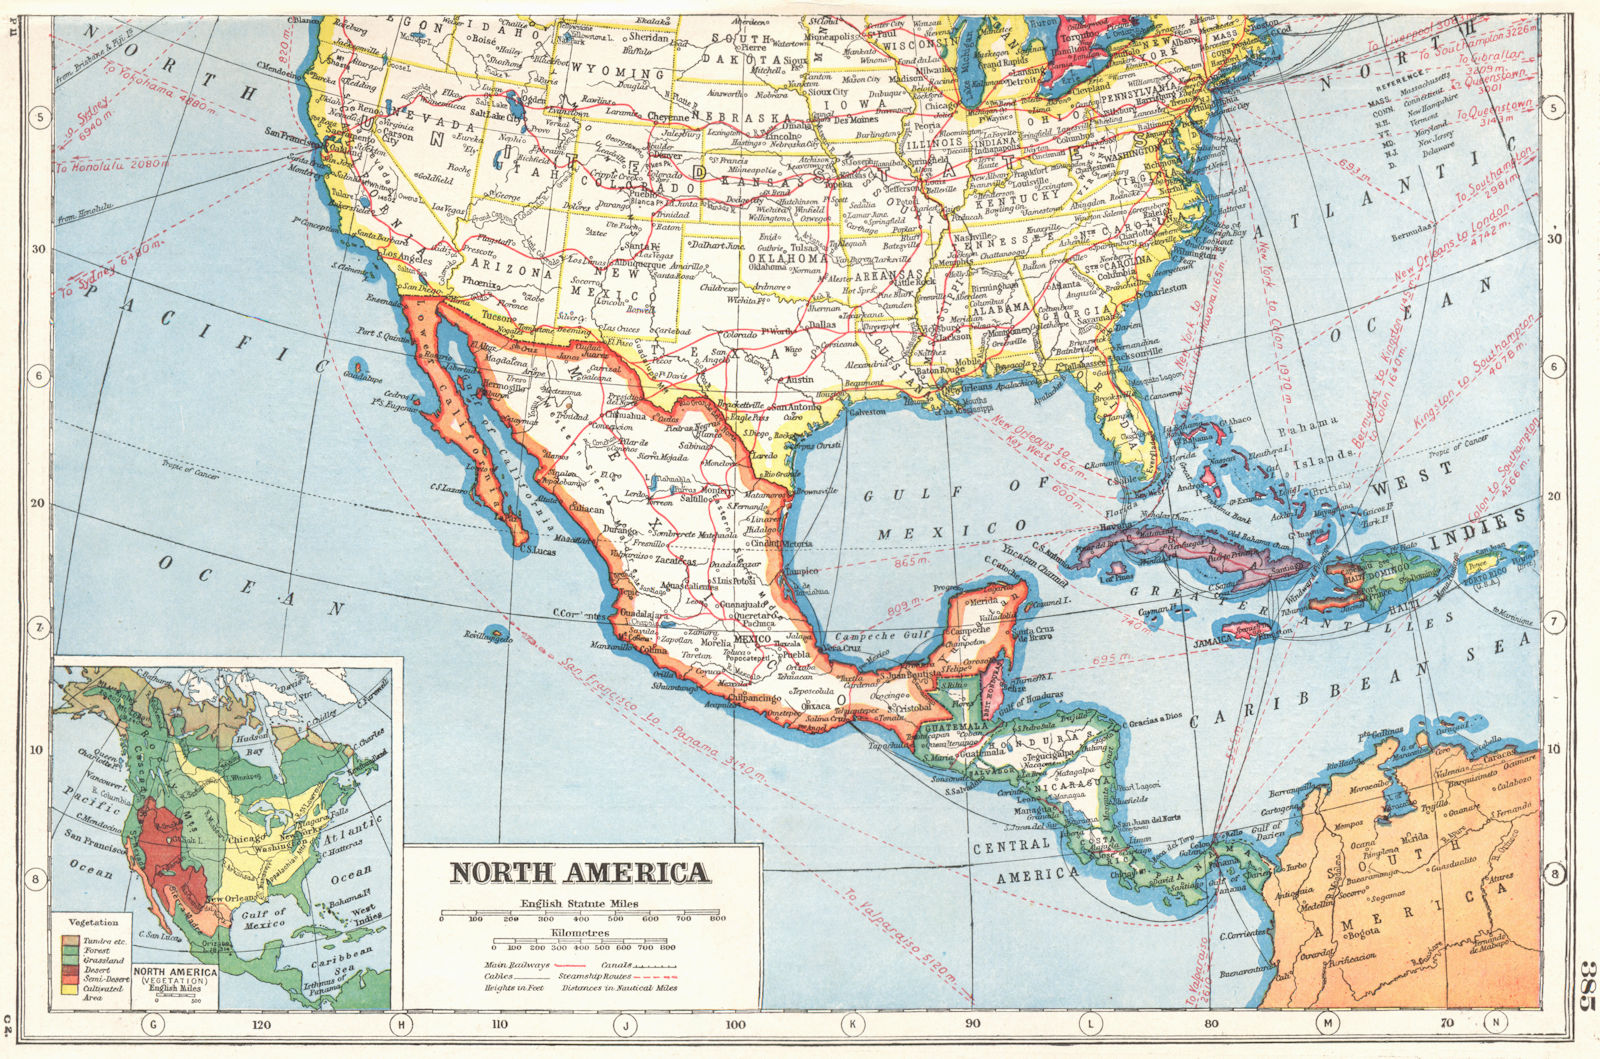 North America Southern United States Mexico Inset Vegetation